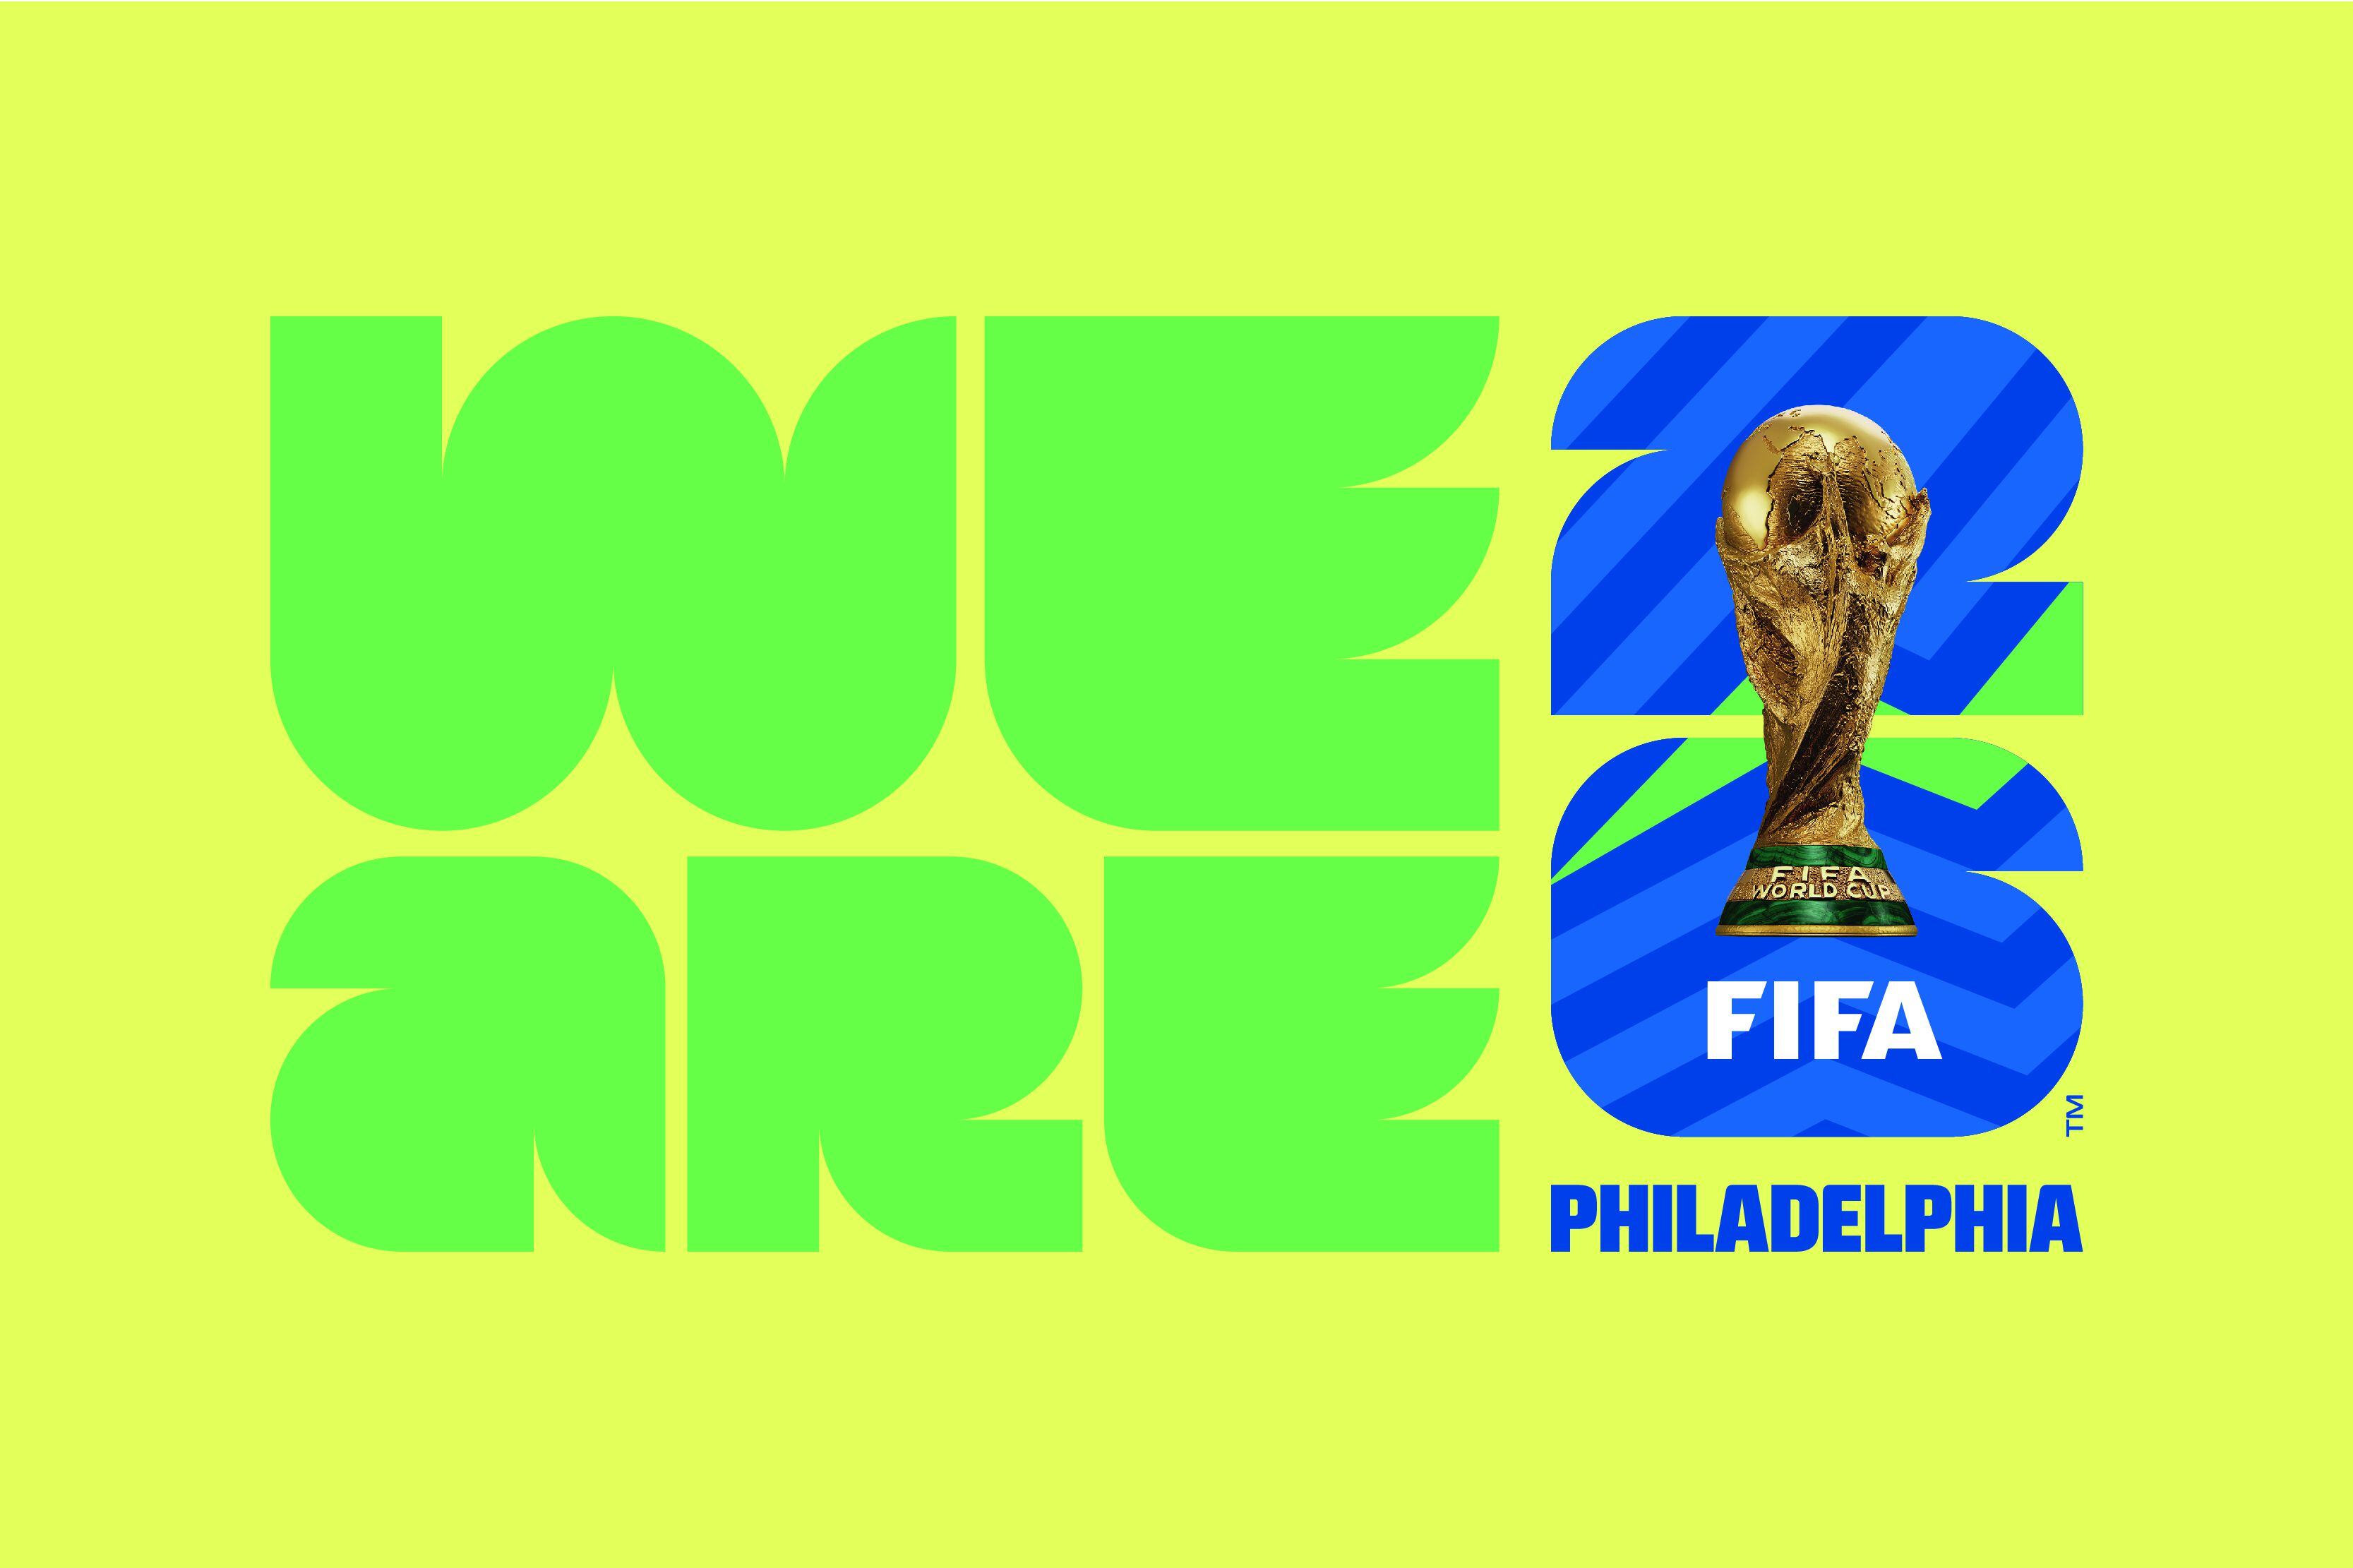 The 2022 FIFA World Cup logo: what it consists of and what it